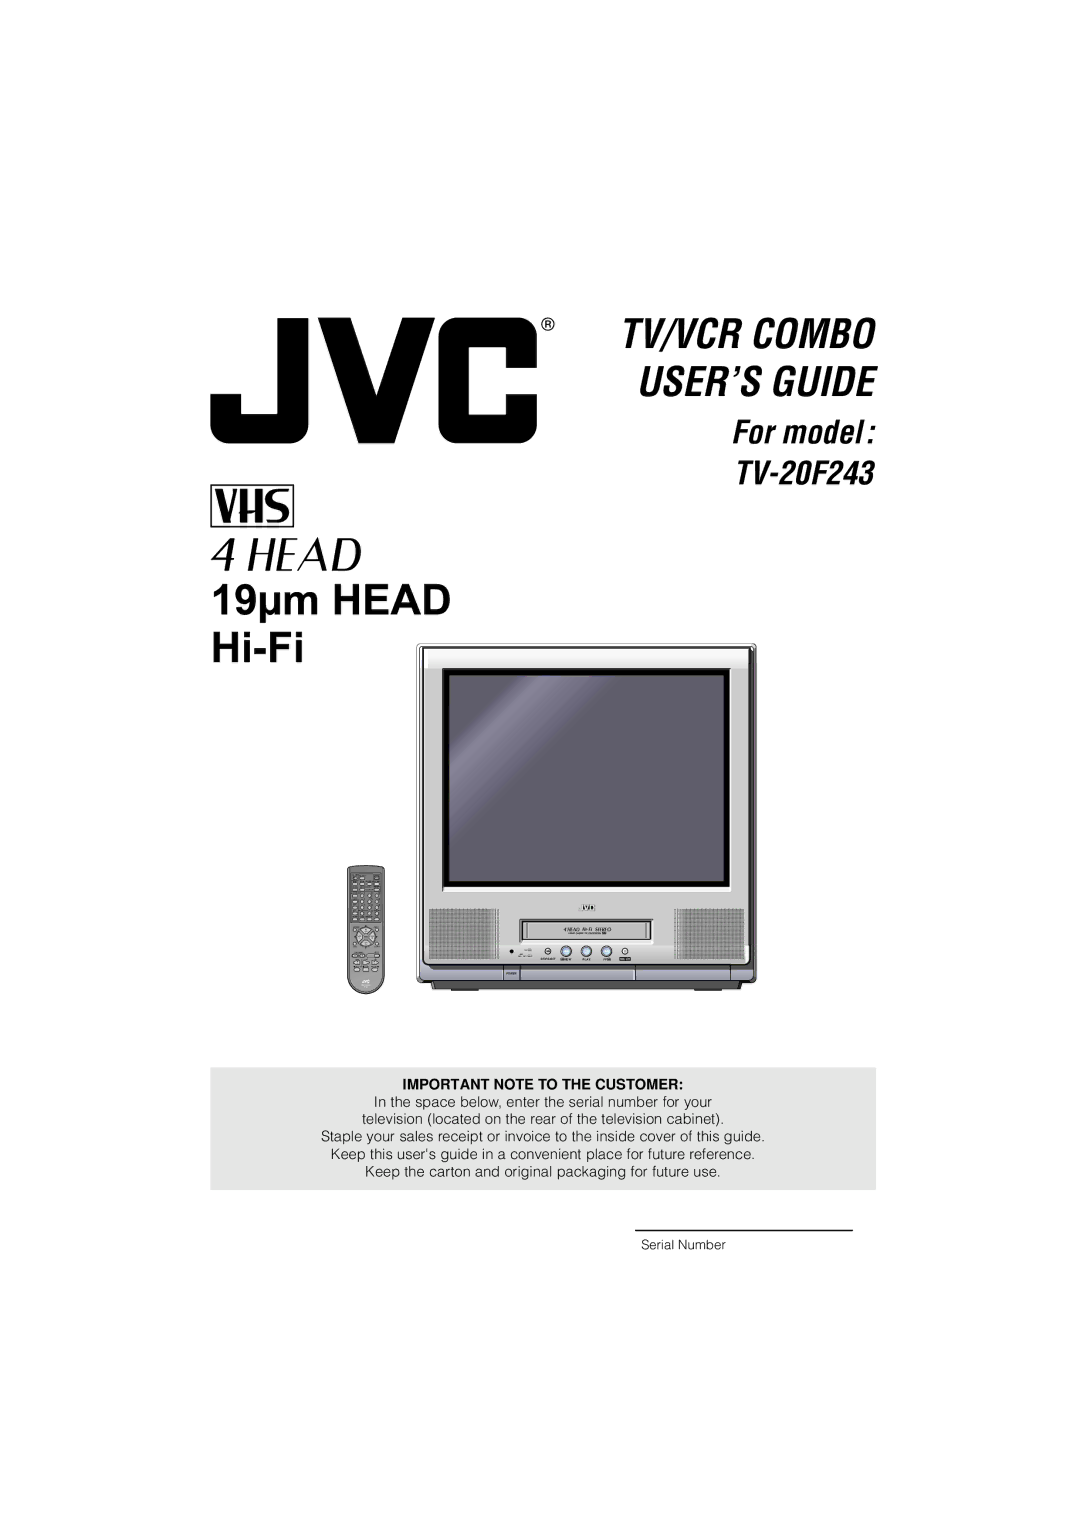 JVC TV-20F243 manual Important Note to the Customer, Serial Number 